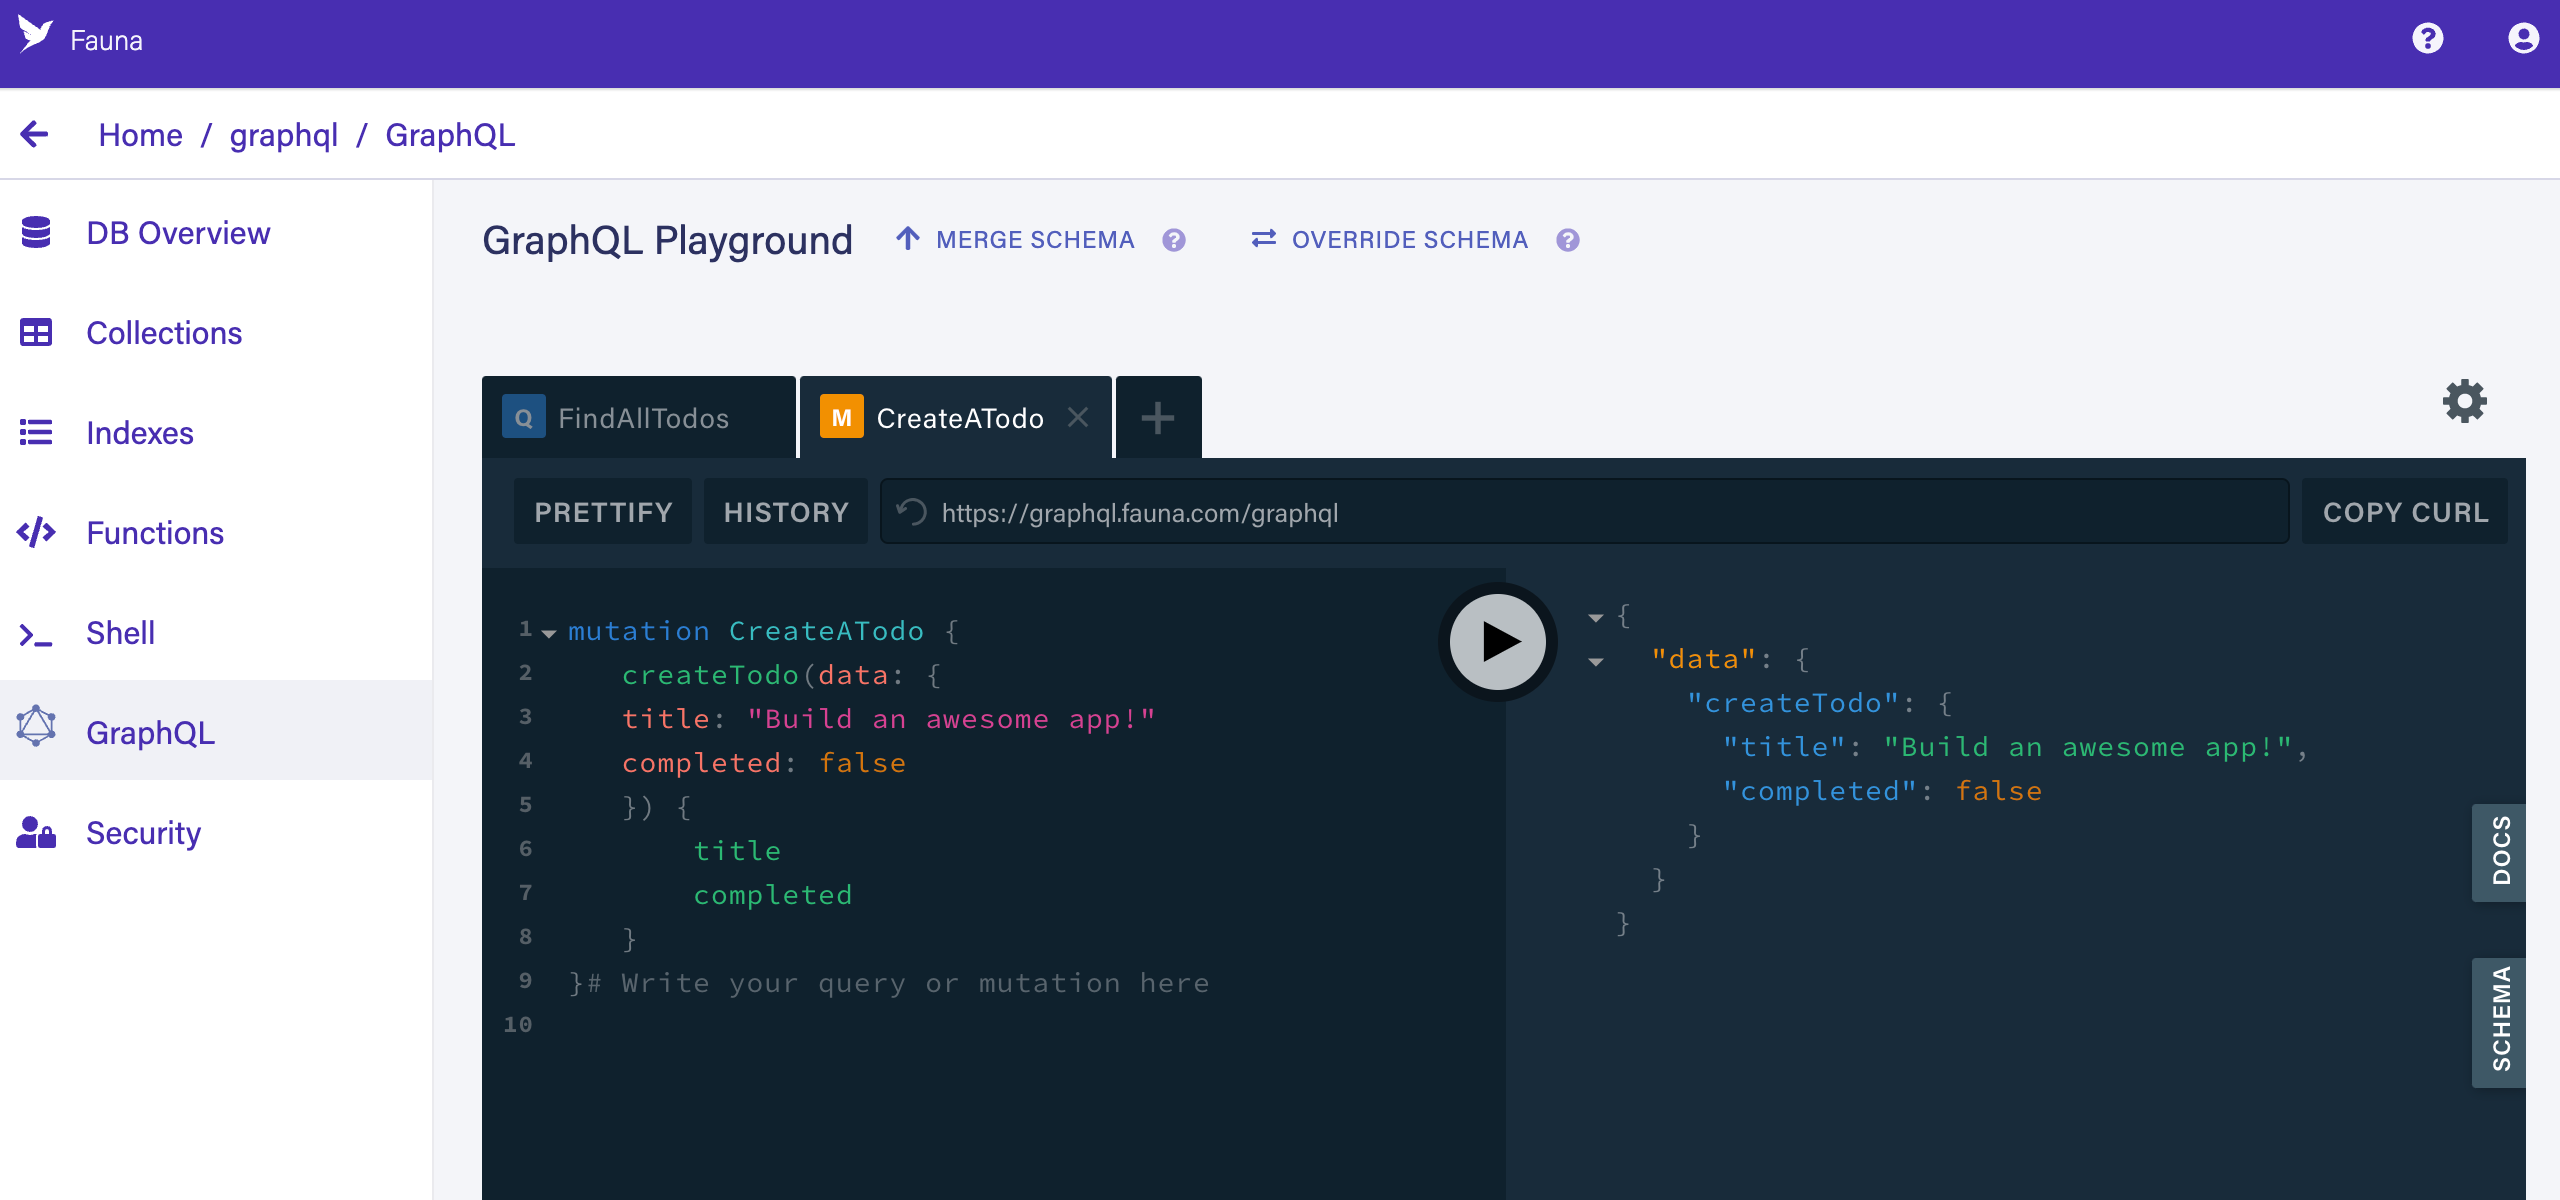 Created a document in GraphQL Playground